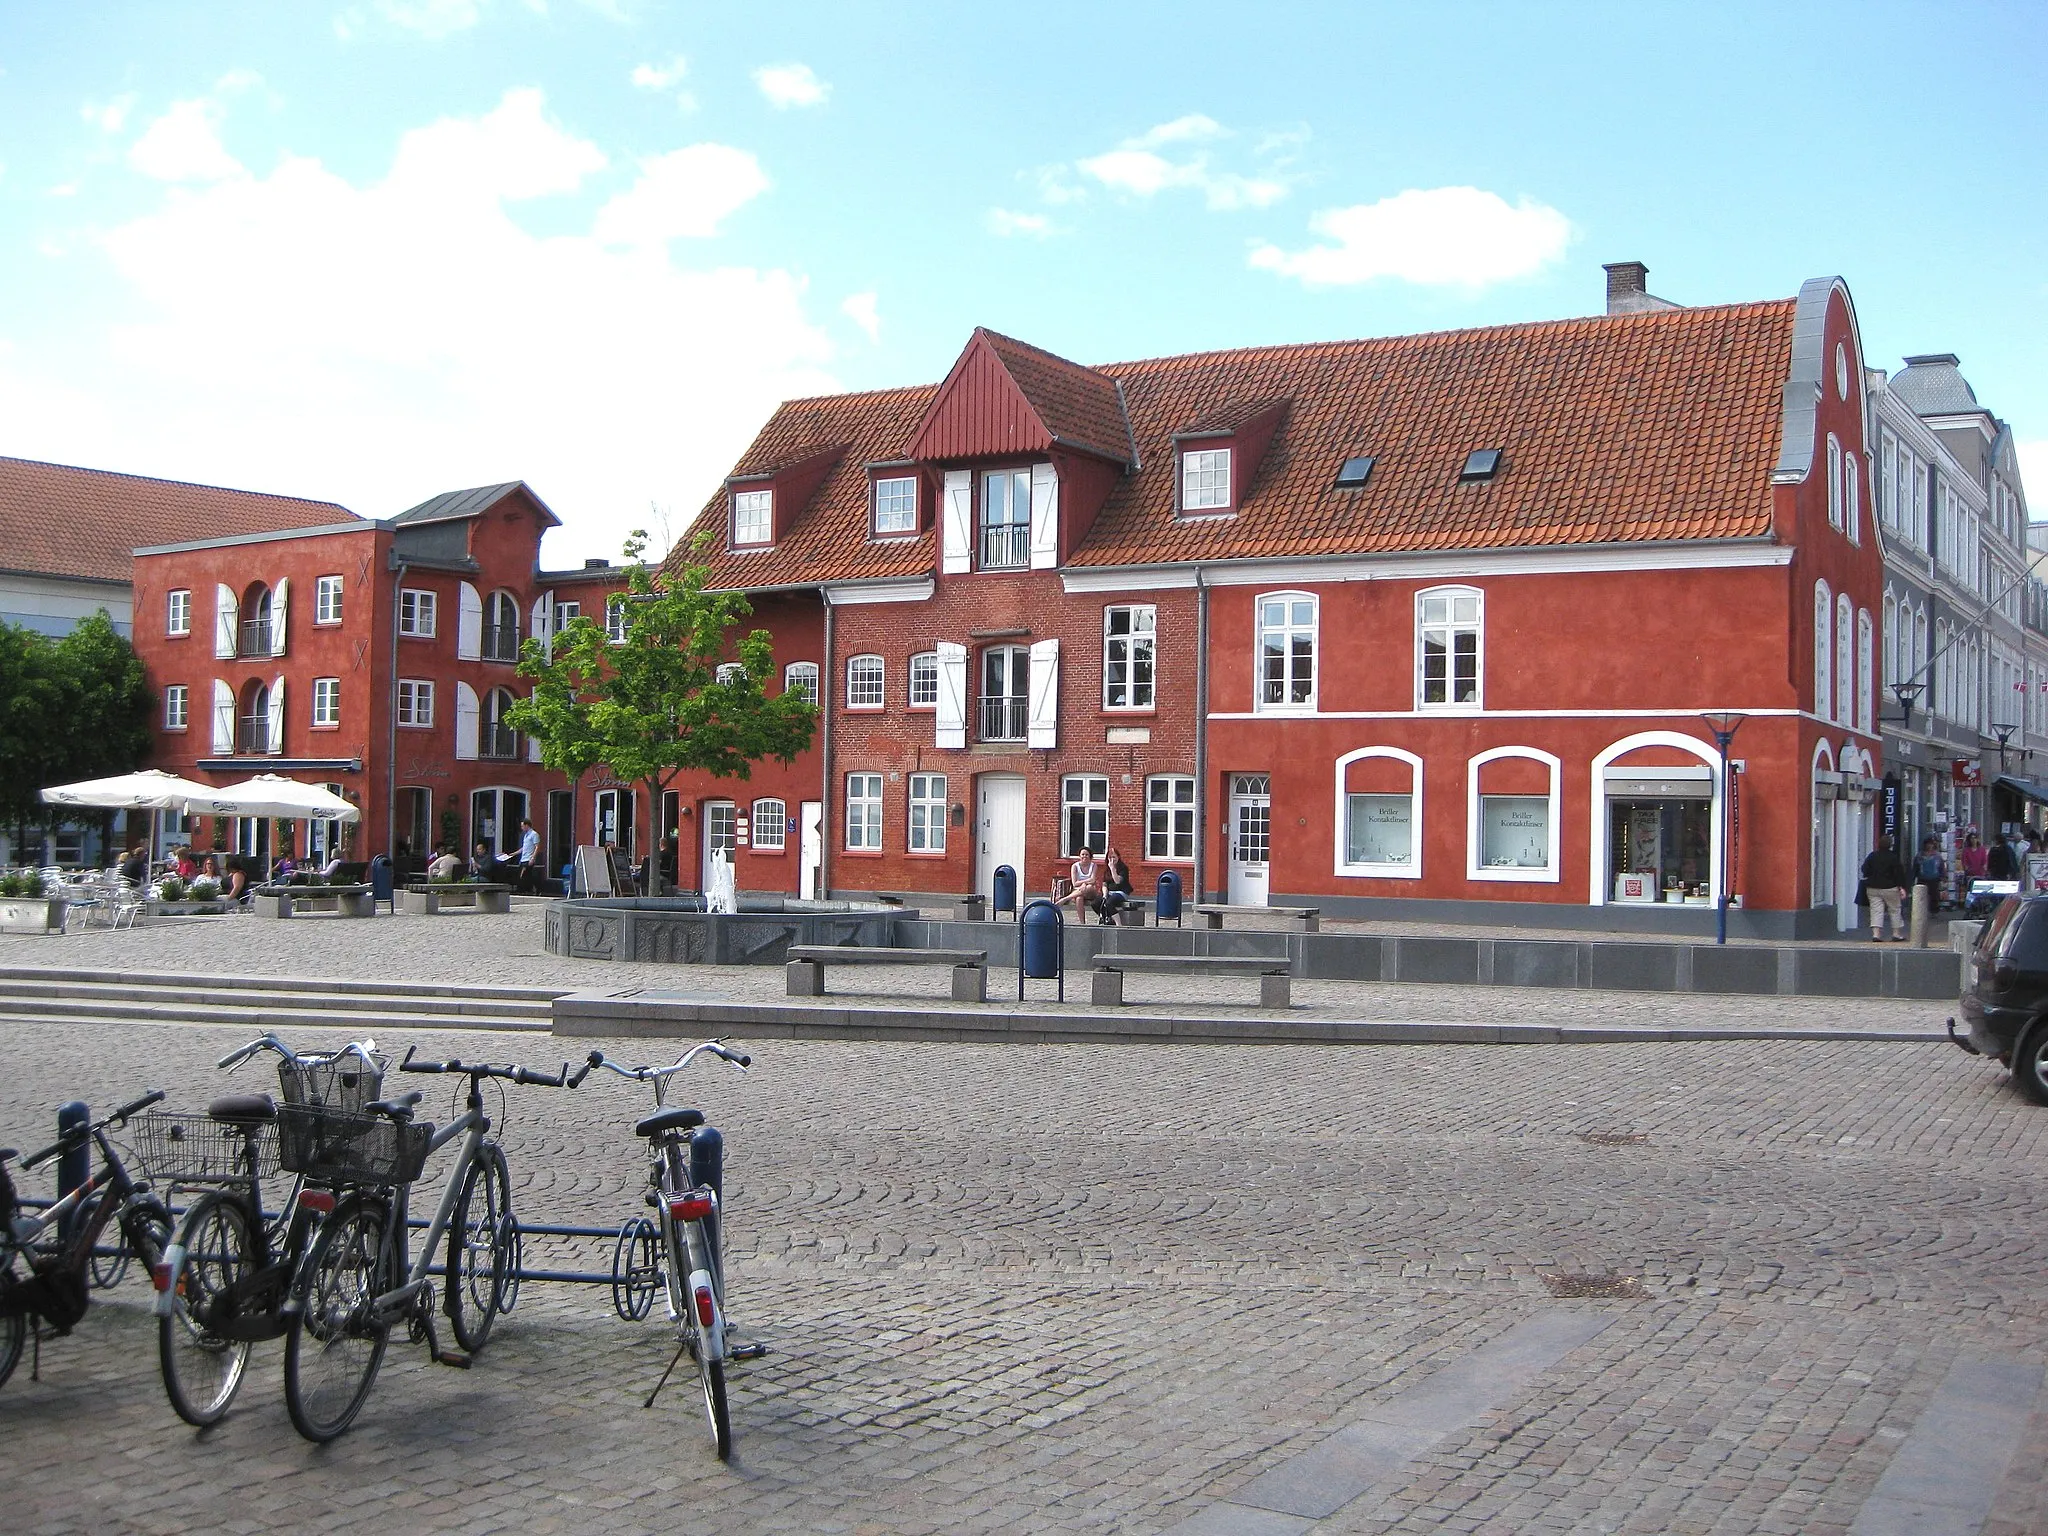 Photo showing: The square "Storetorv" in the town "Aabenraa". The town is located in Southern Jutland, Denmark.